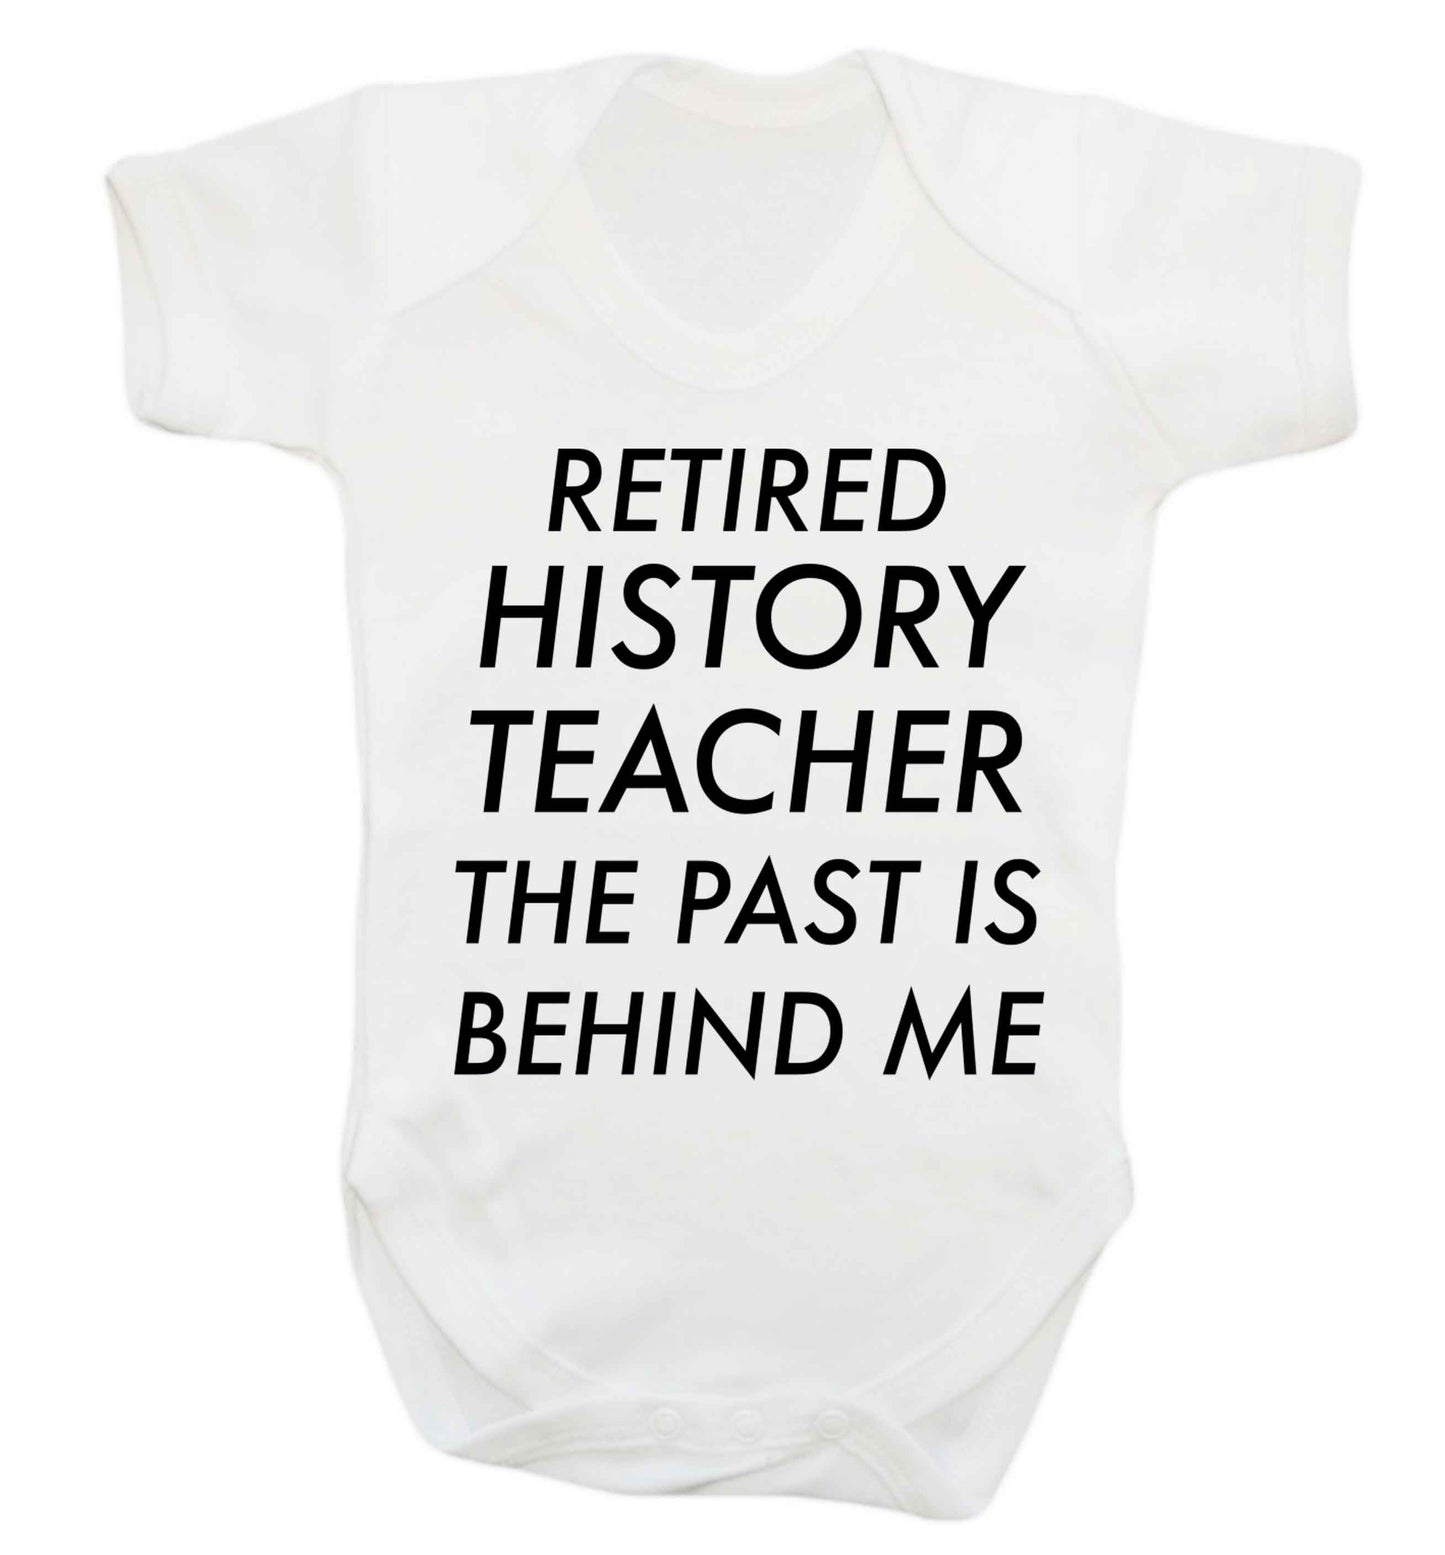 Retired history teacher the past is behind me Baby Vest white 18-24 months